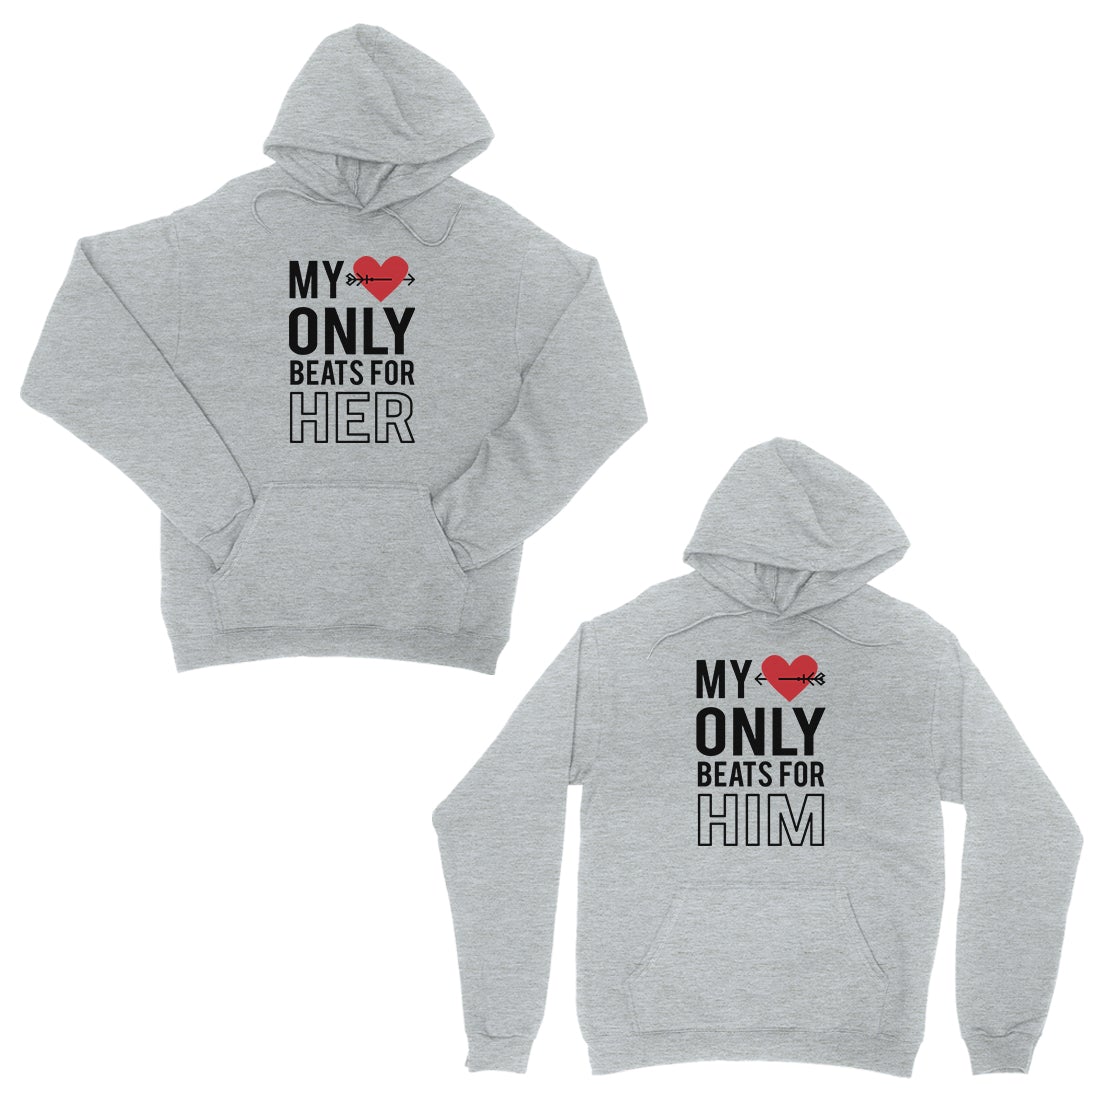 My Heart Beats For Her Him Grey Matching Couple Hoodies For X-mas